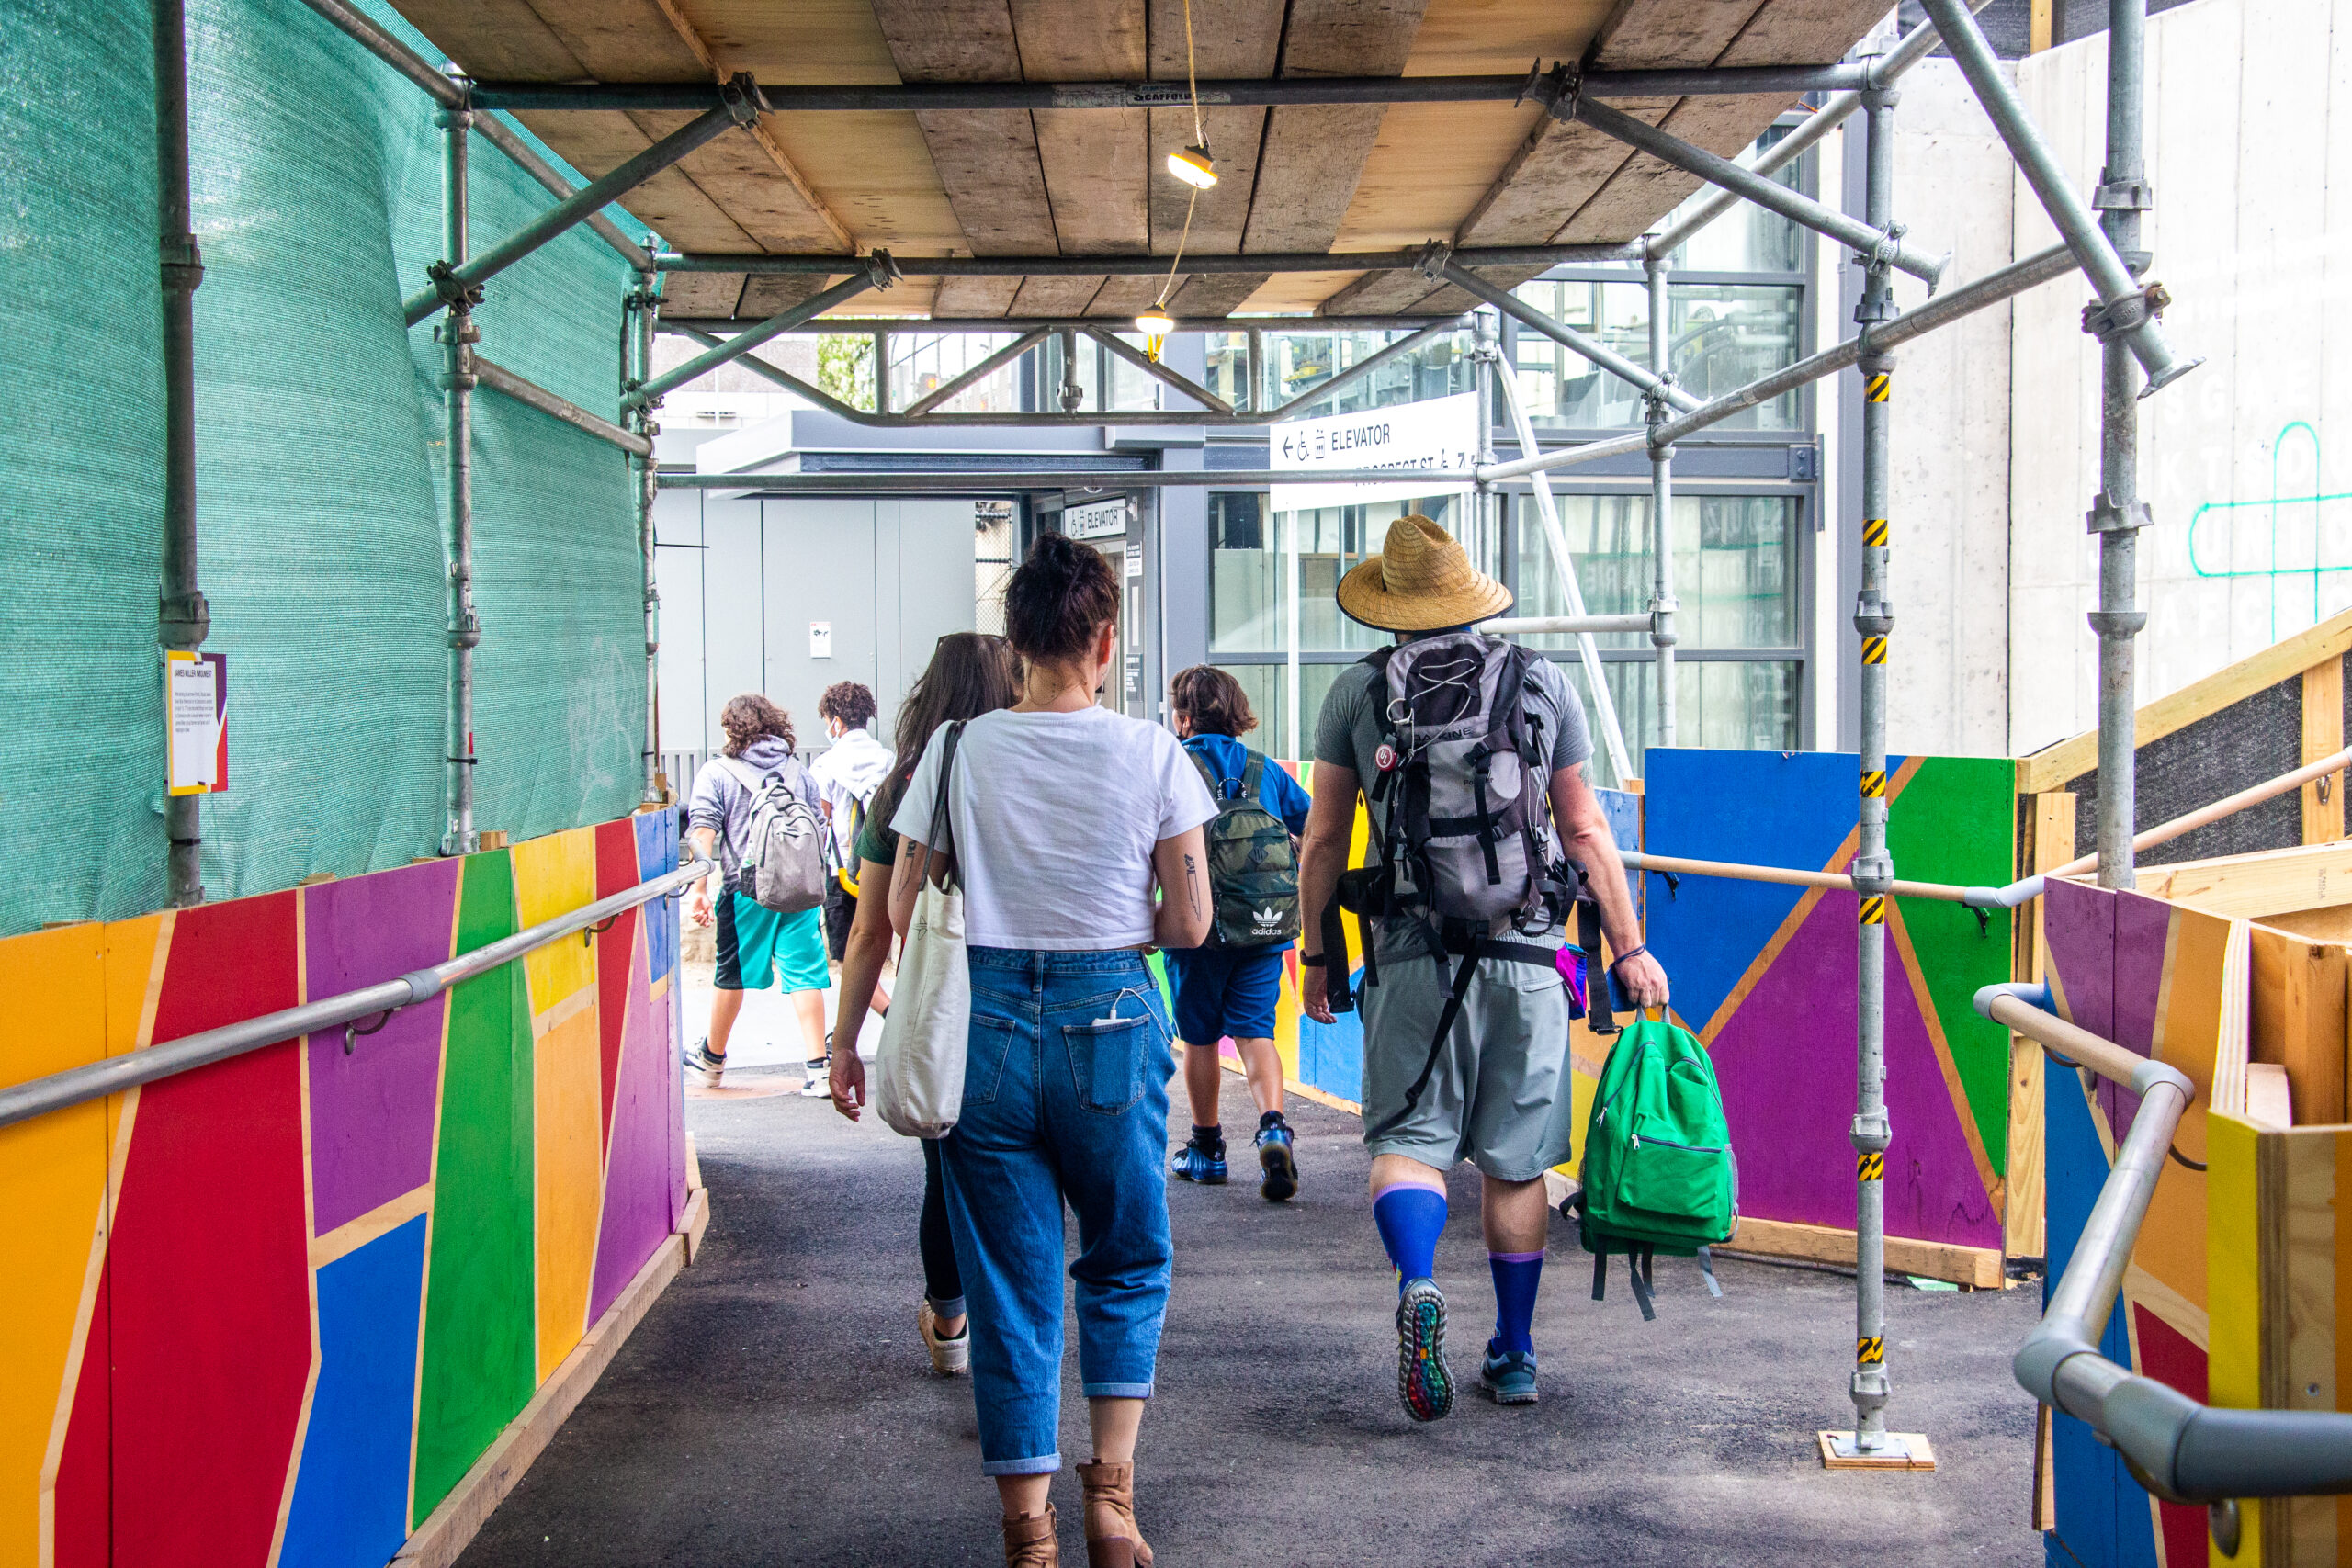 People walk away from the camera along a walkway with brightly-colored sides